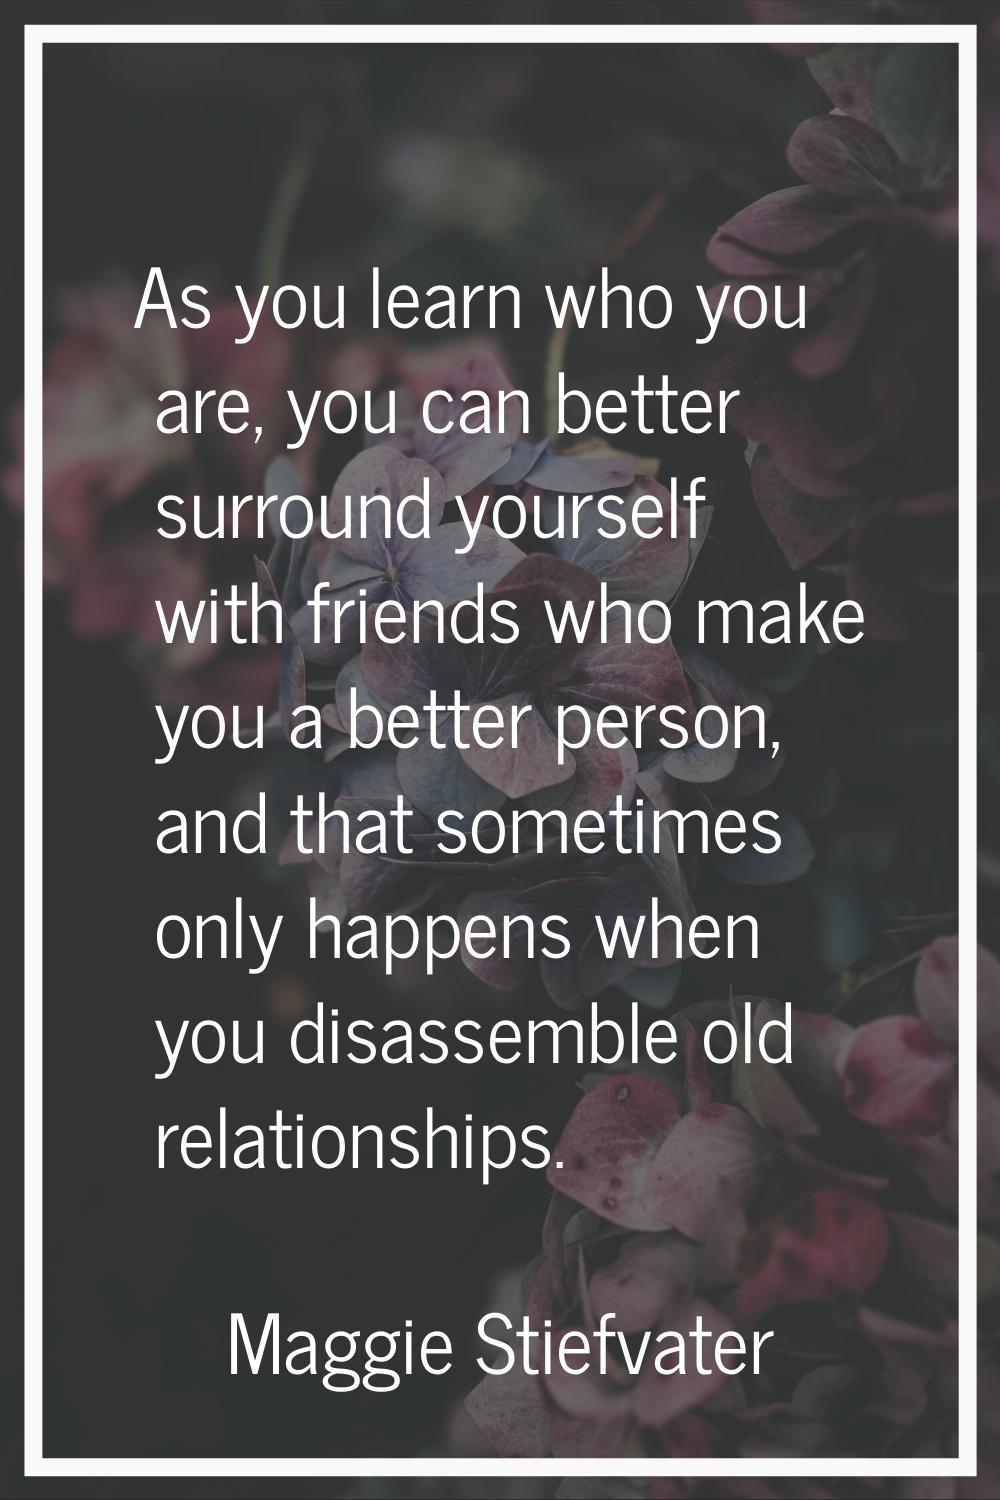 As you learn who you are, you can better surround yourself with friends who make you a better perso